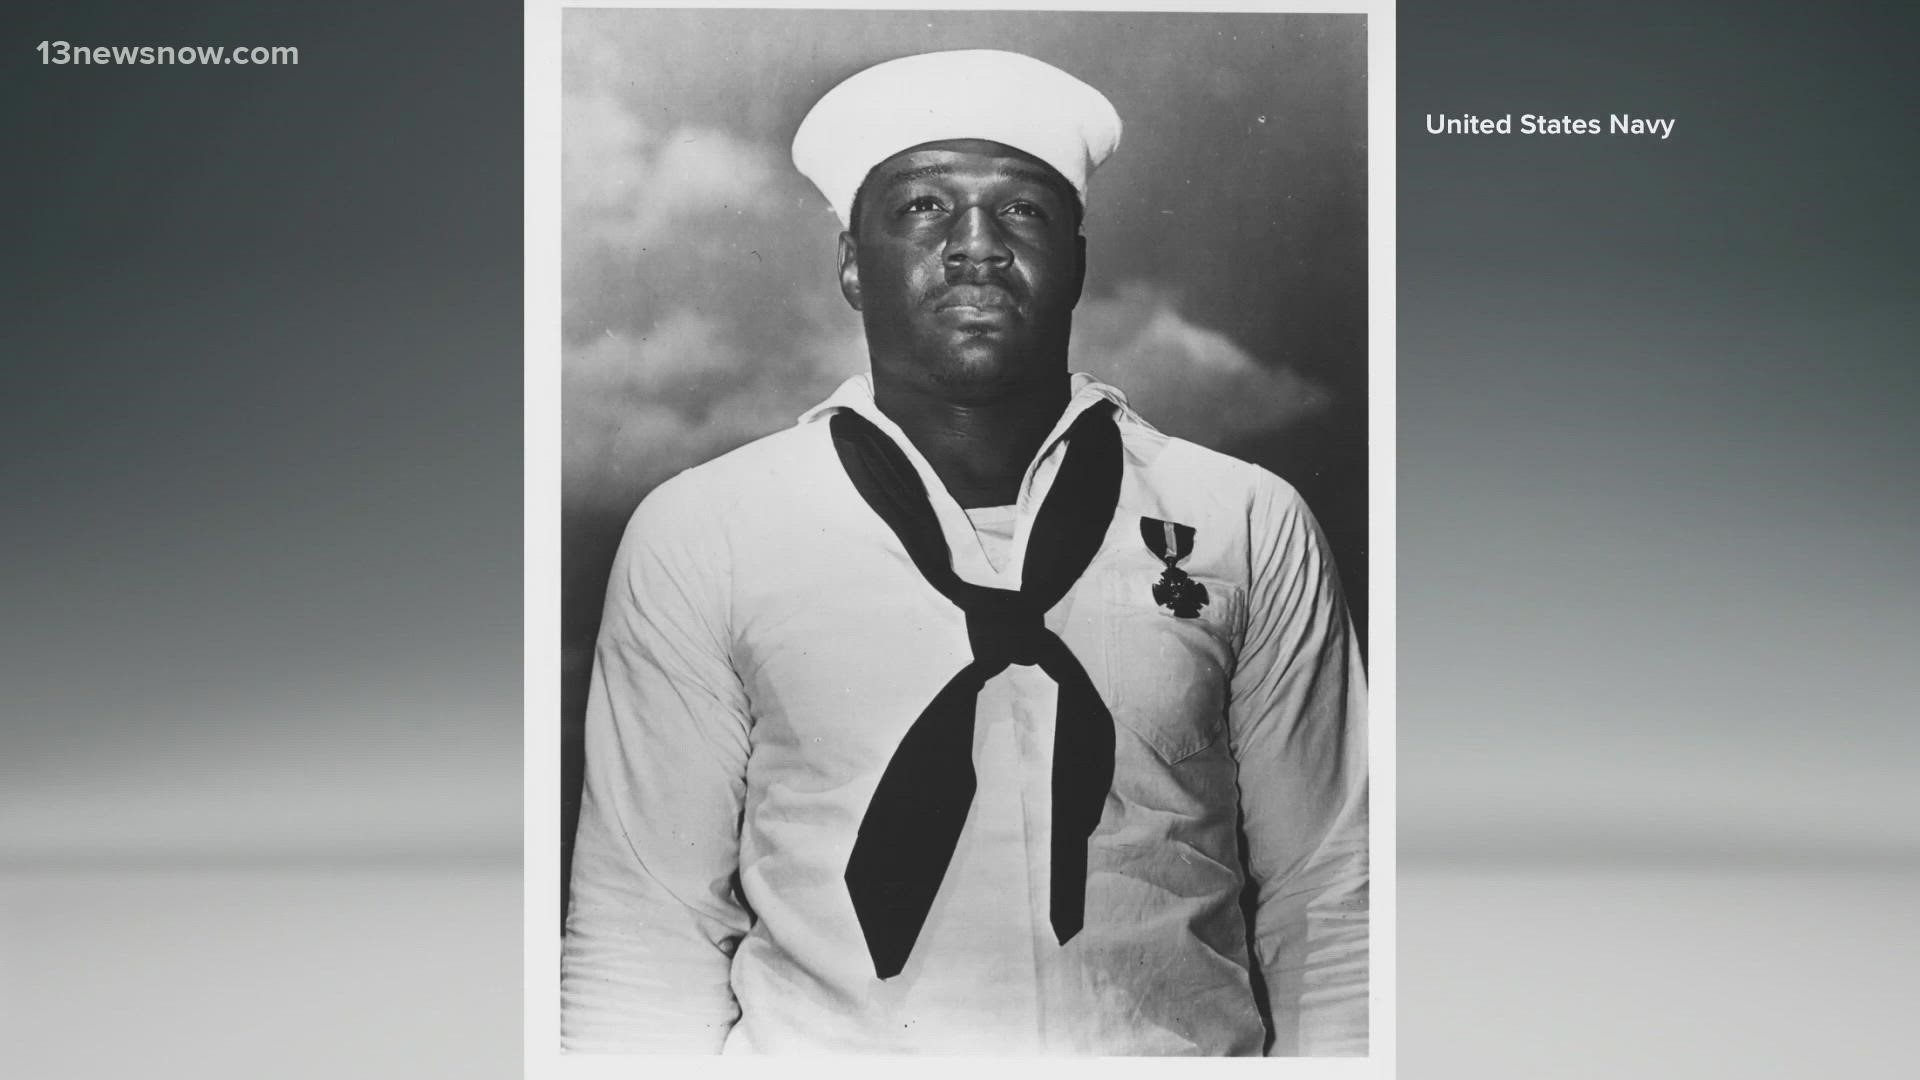 The ship will honor World War II hero Doris Miller and is set to be commissioned in 2032.